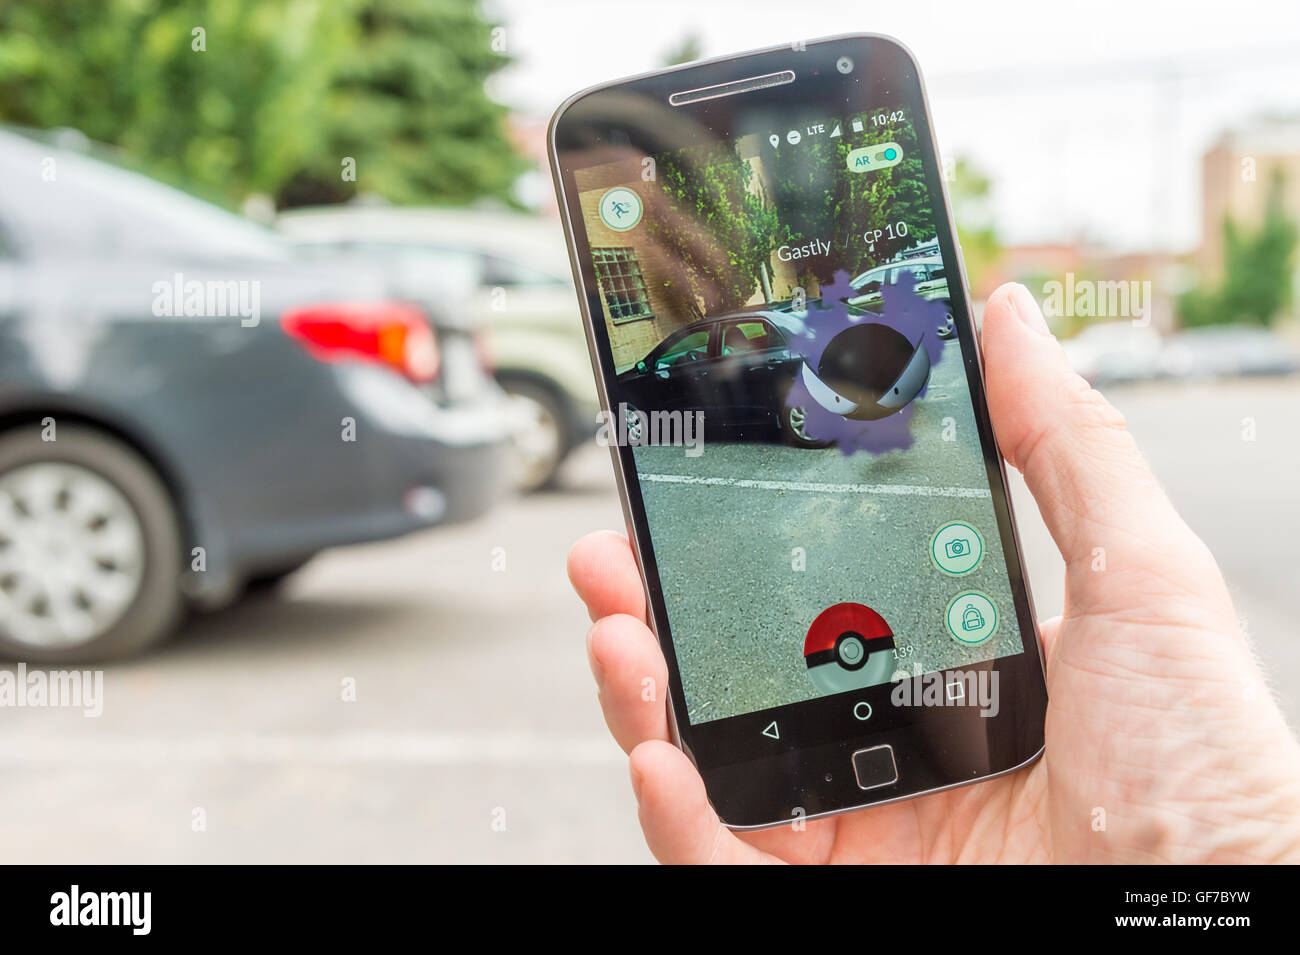 Montreal, CA - July 28, 2016: Closeup of a man playing Pokemon Go on a smart phone. Pokemon Go is a virtual reality game release Stock Photo